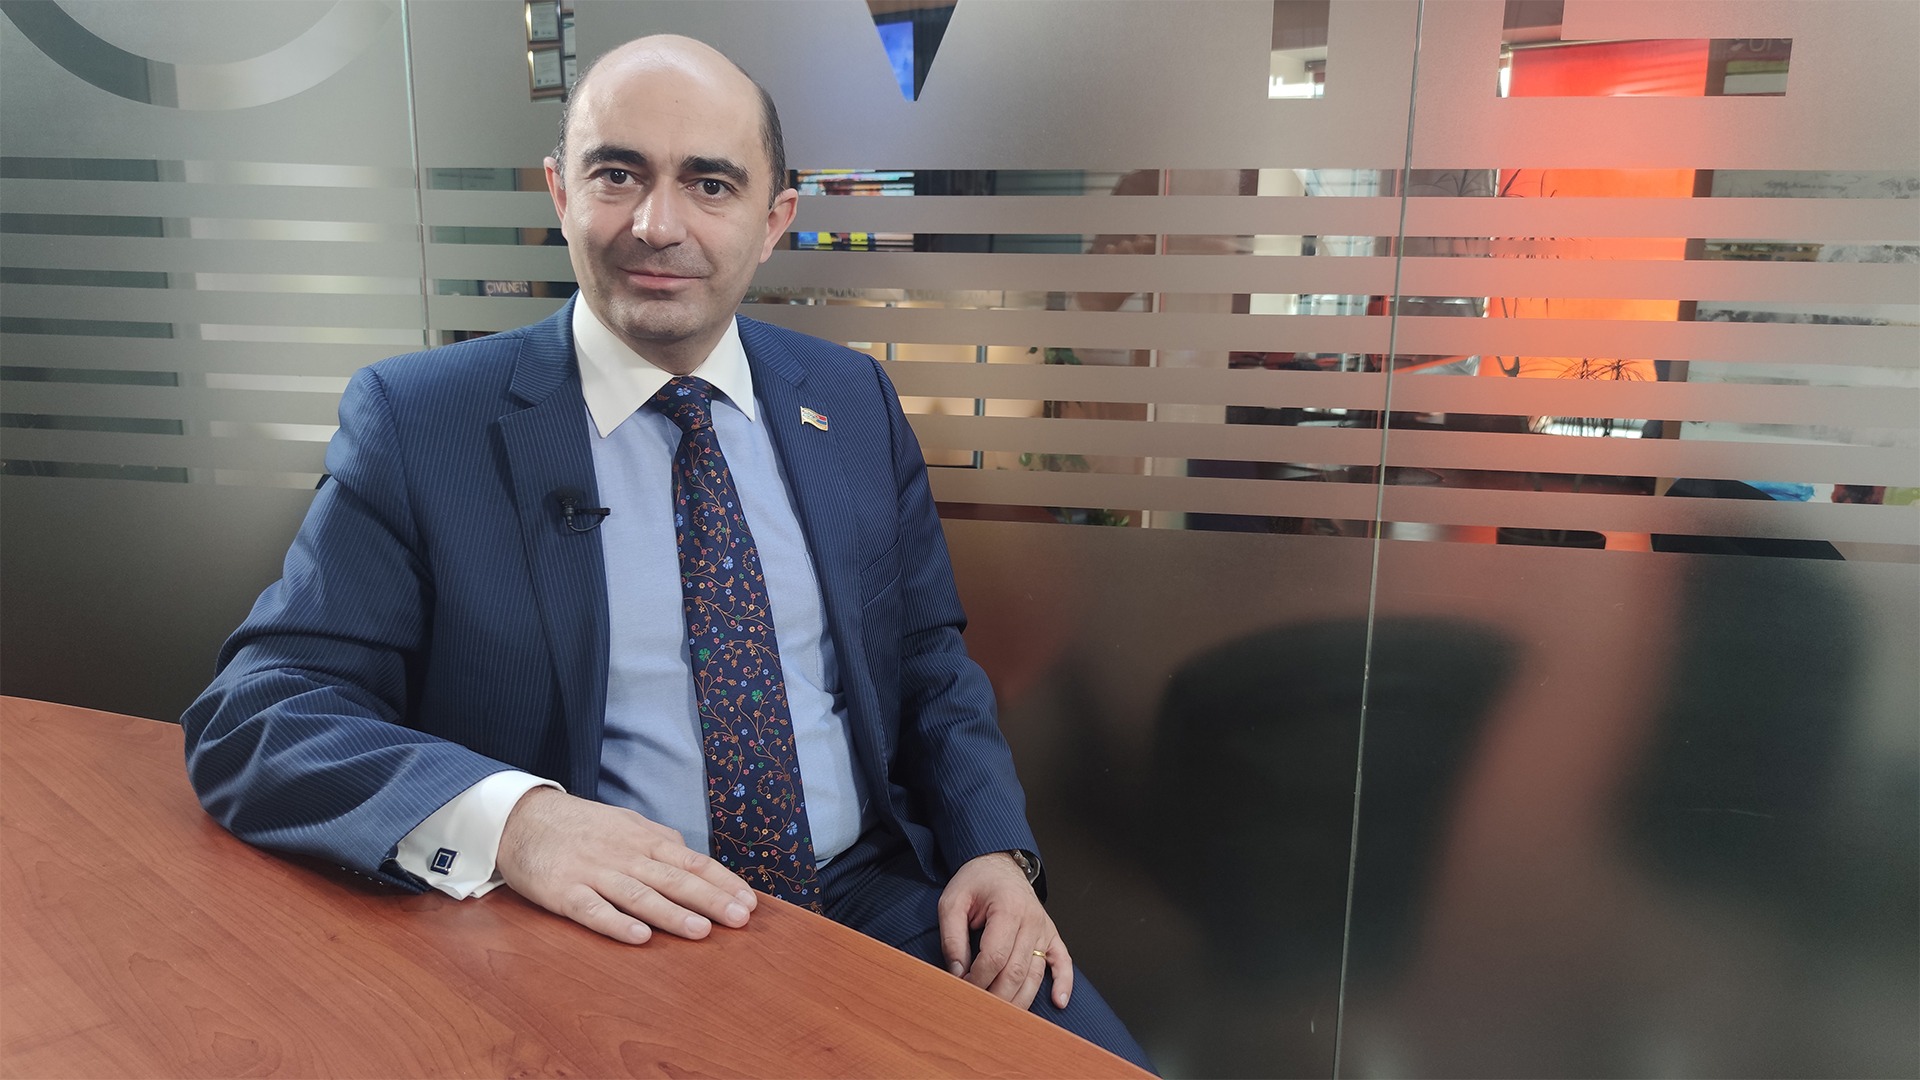 The Bright Armenia Party Readies for Elections – A Talk with Edmon Marukyan